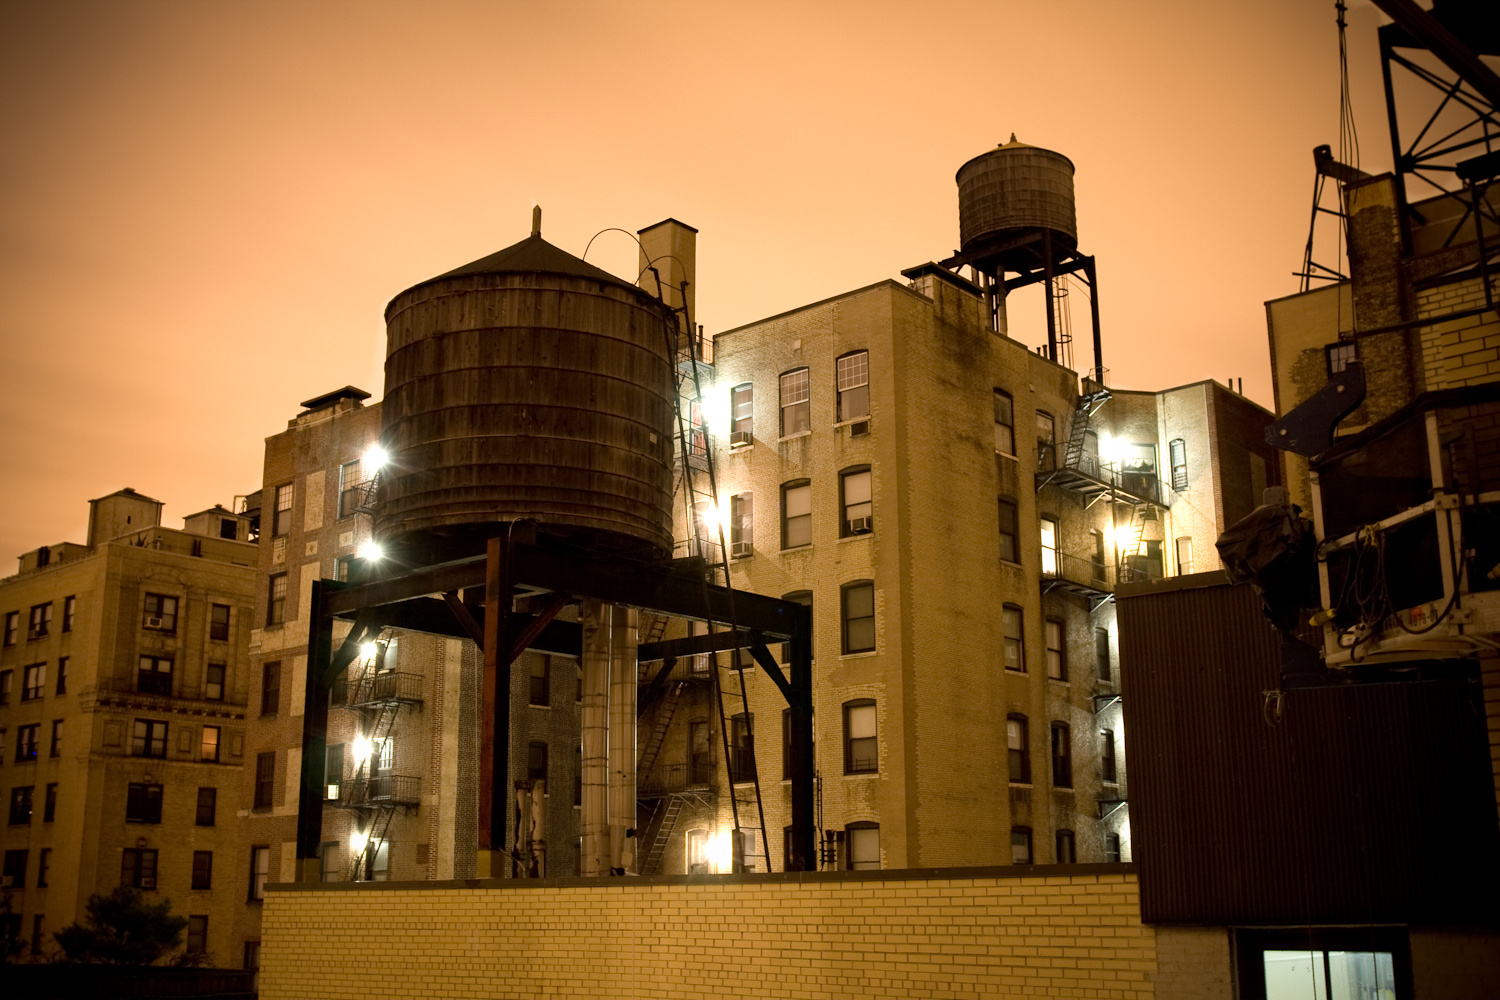 New York water towers at night large